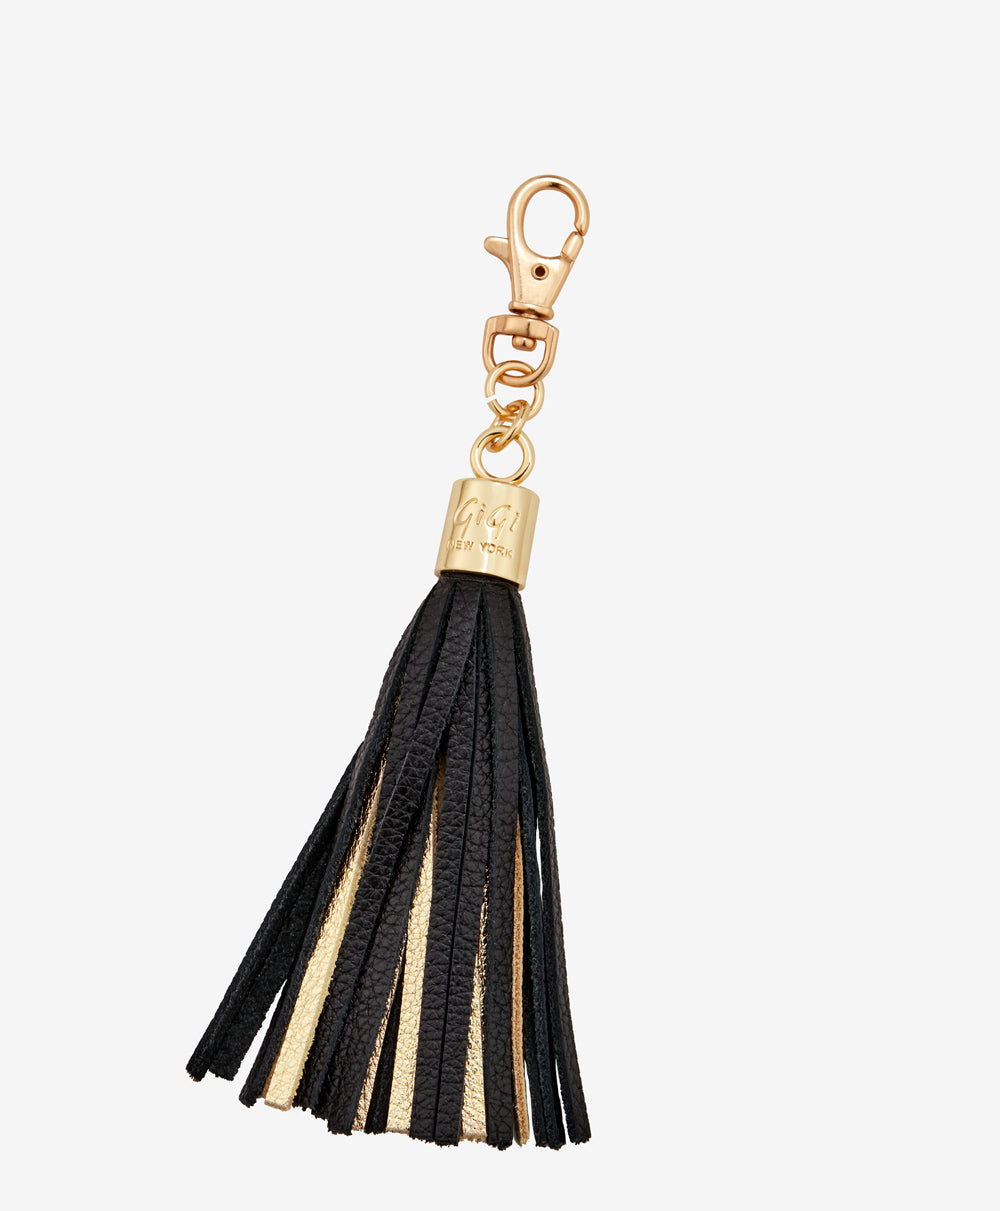 Leather Tassel Key Chain | Black and Gold Leather